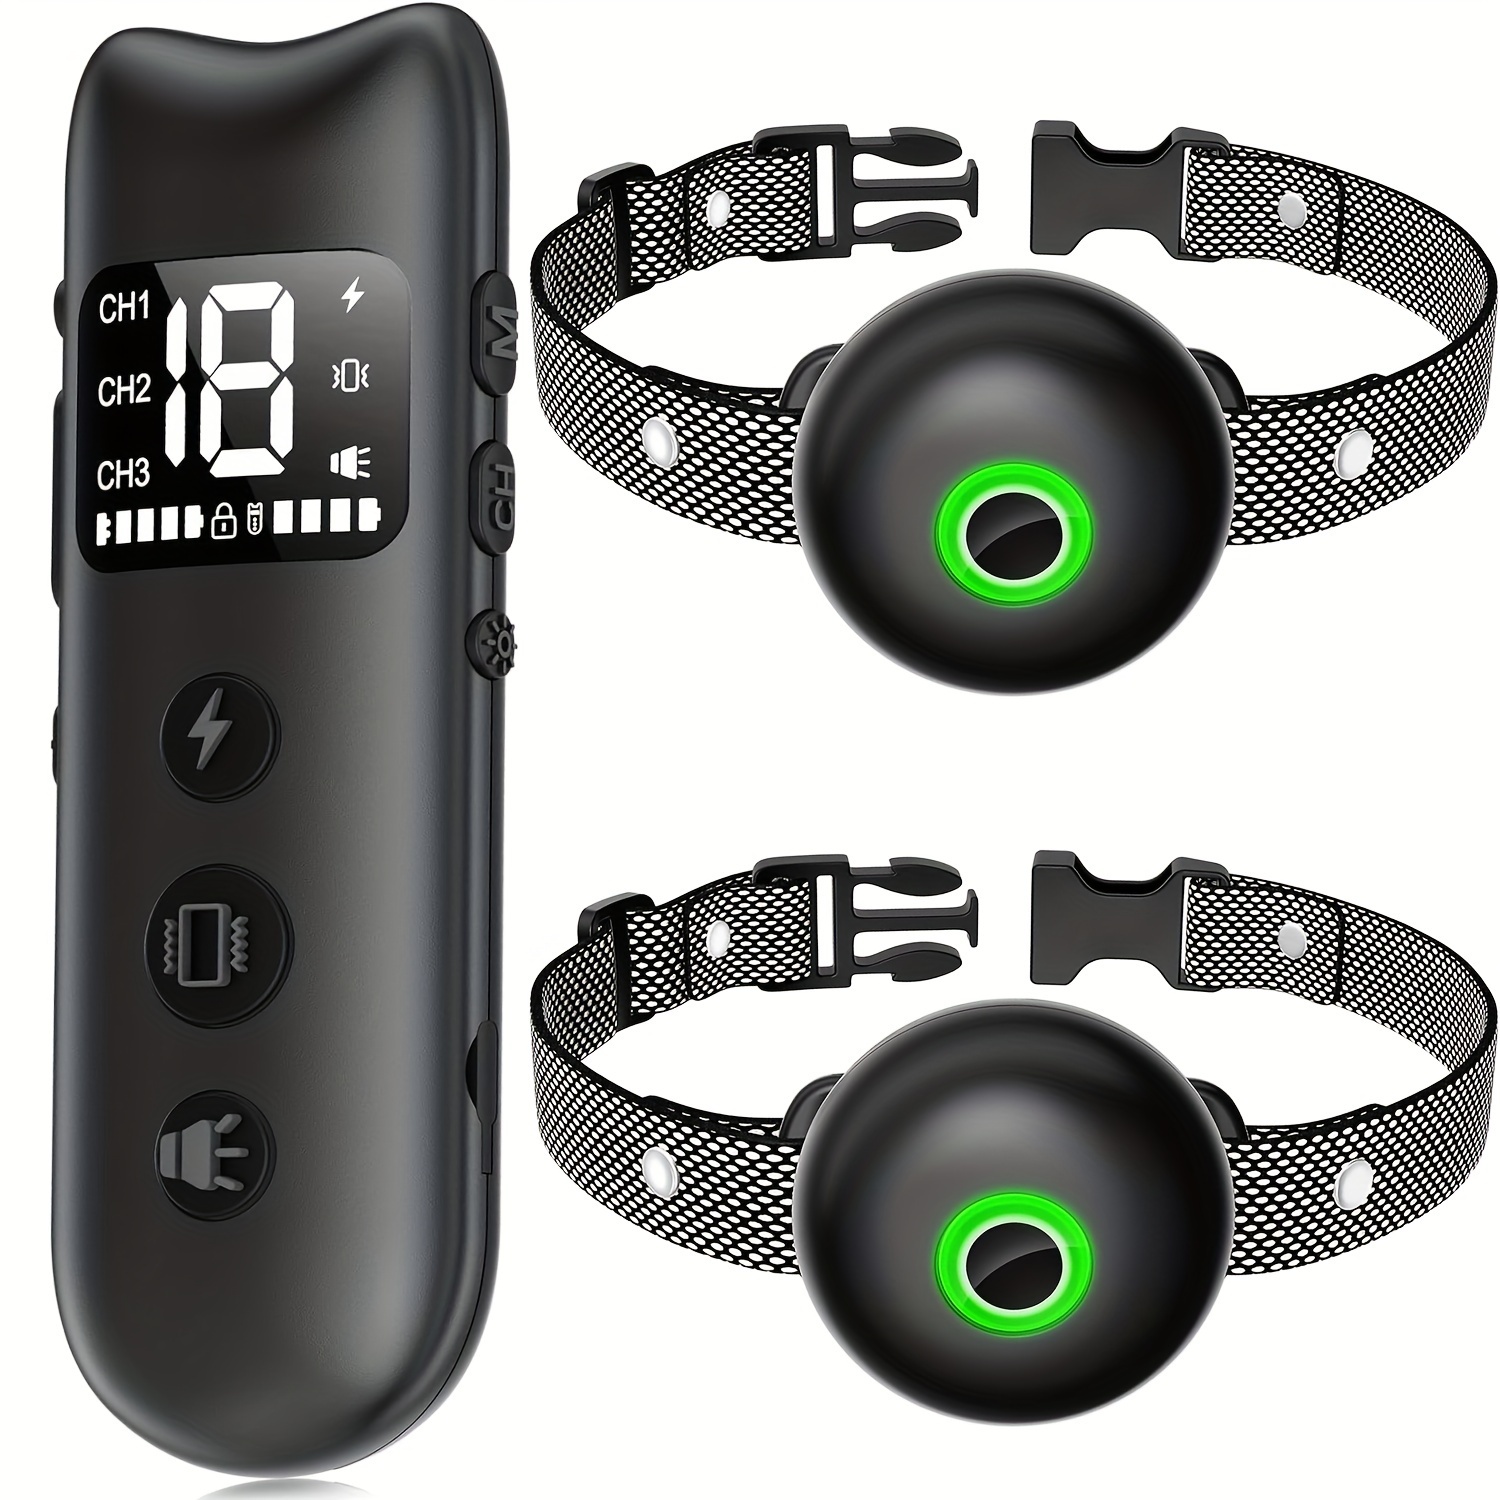 

Dog Shock Collars, Dog Training Collar With Remote, 3 Training Modes Rechargeable E-collar For Medium Large Dogs (1 Remote And 2 Collars)